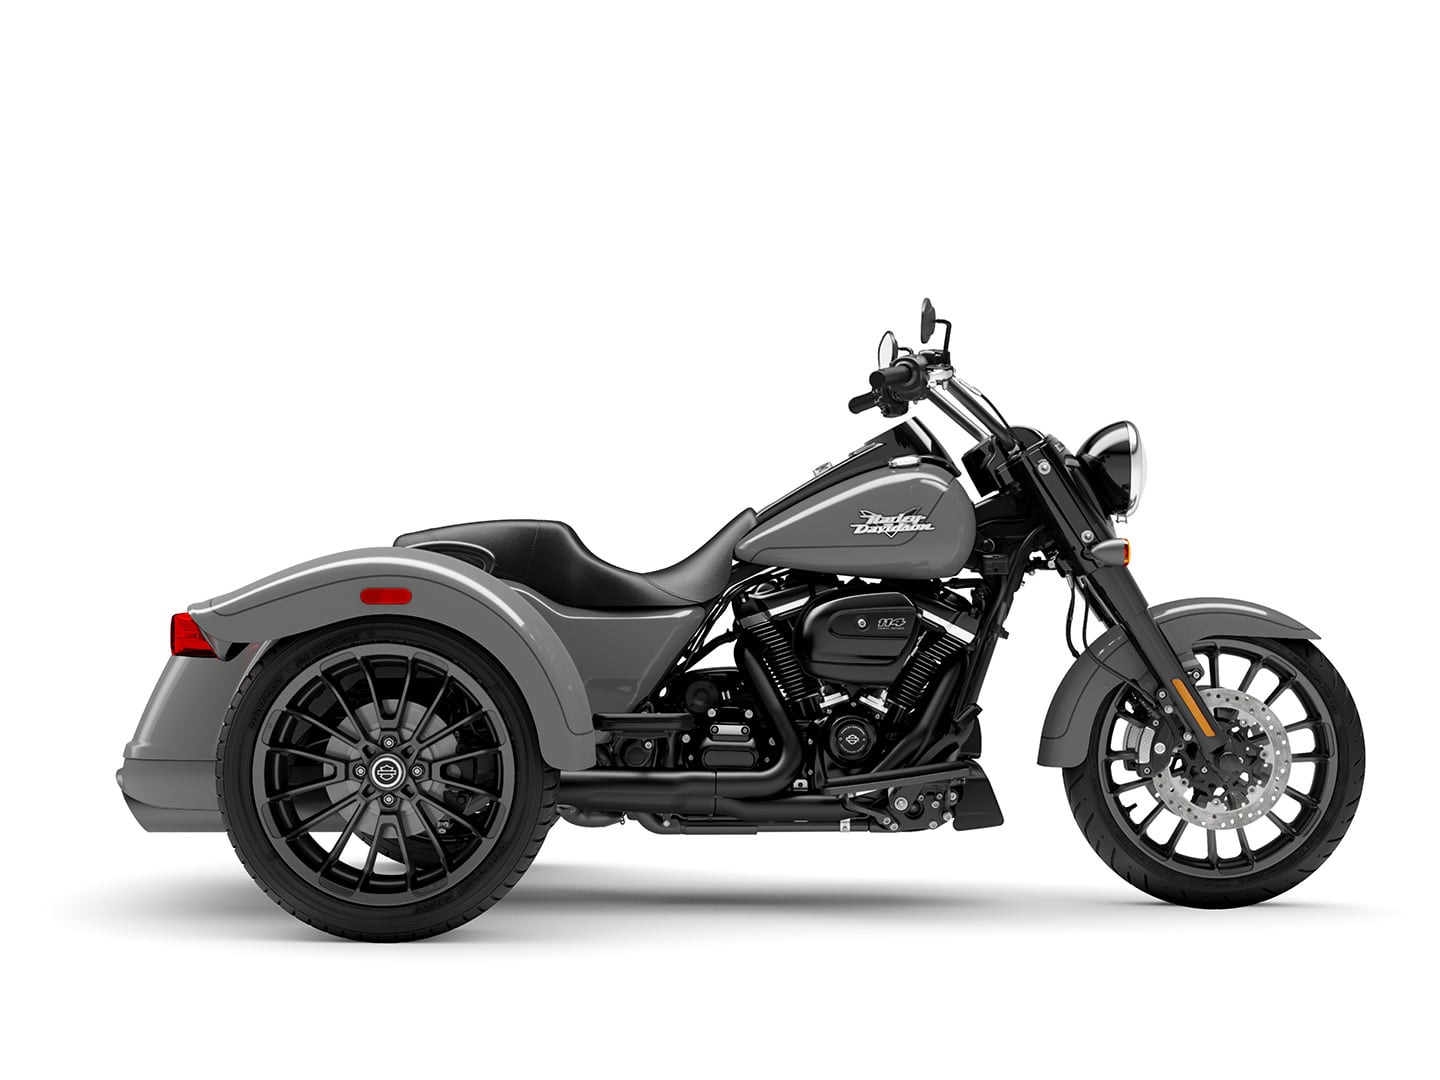 The Freewheeler is the stripped-back cruiser of the Harley-Davidson trike family.